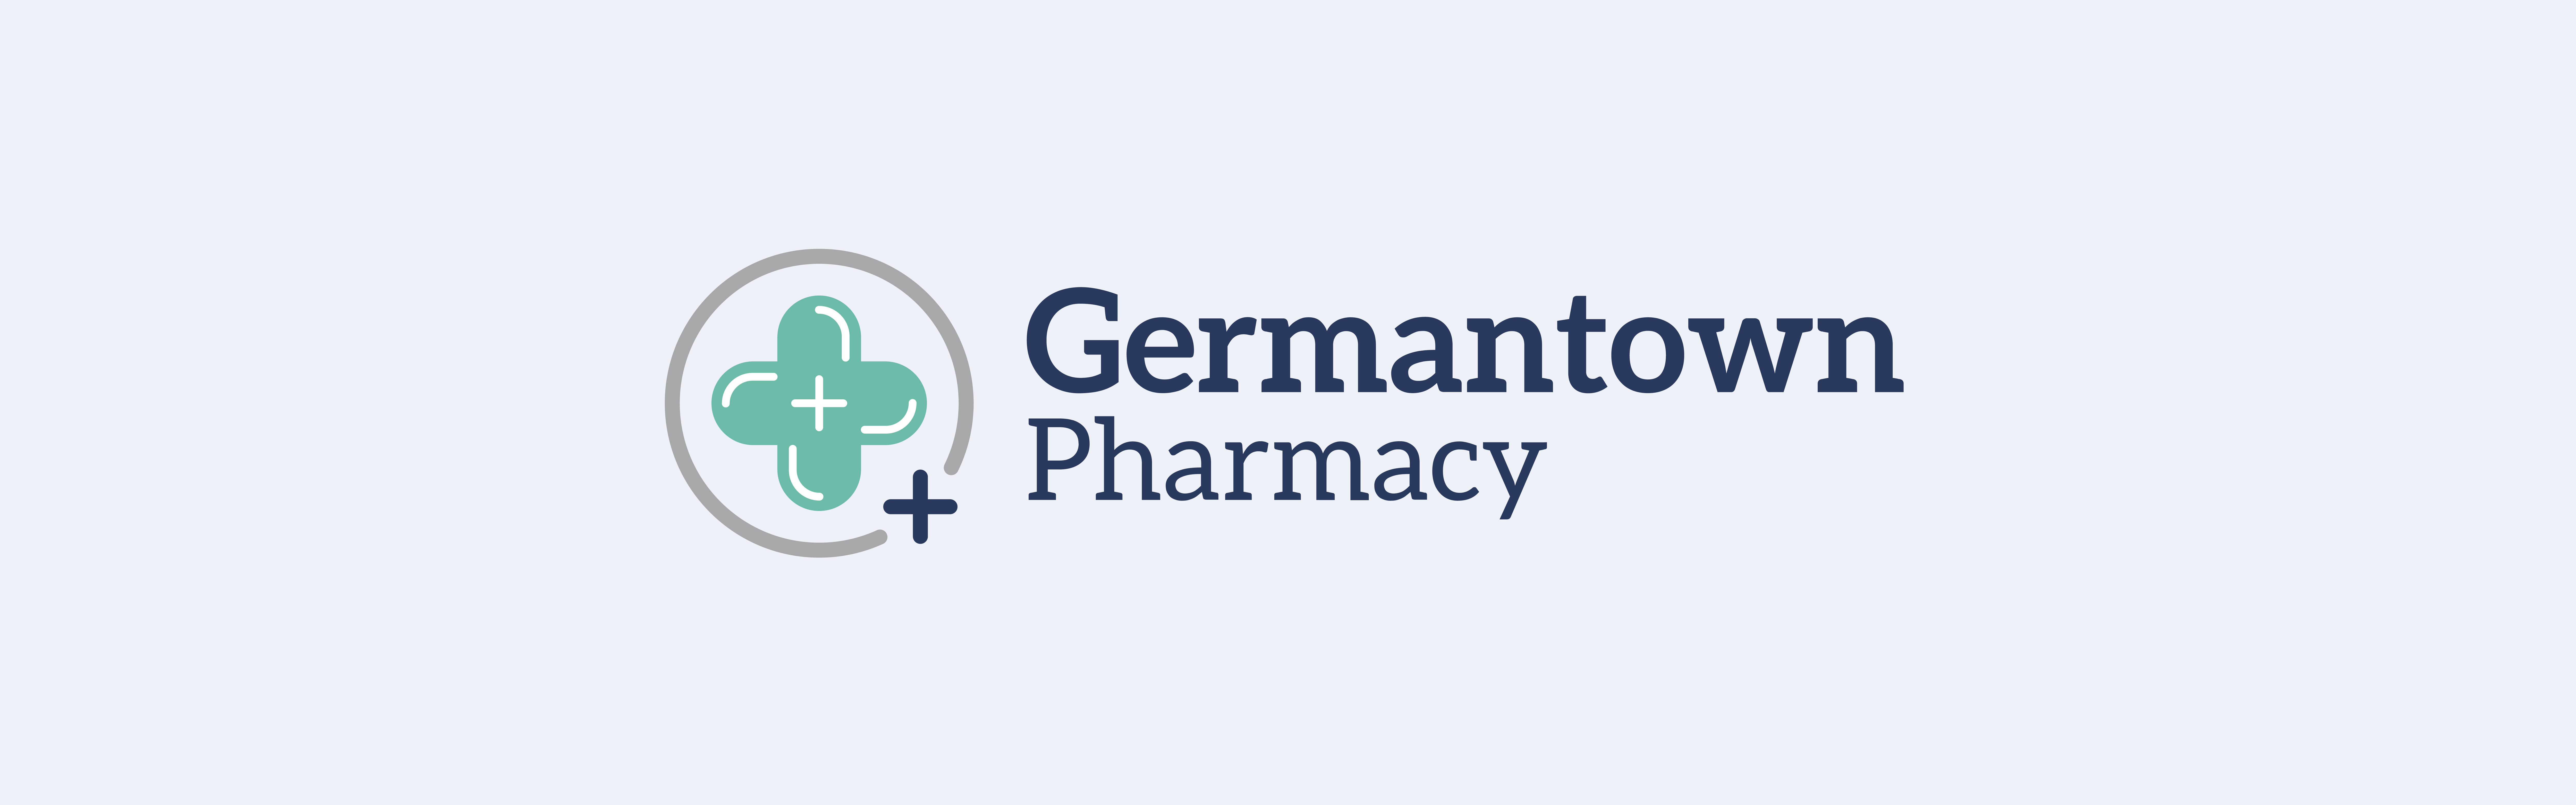 Logo of Germantown Pharmacy featuring a green cross and the name next to it.